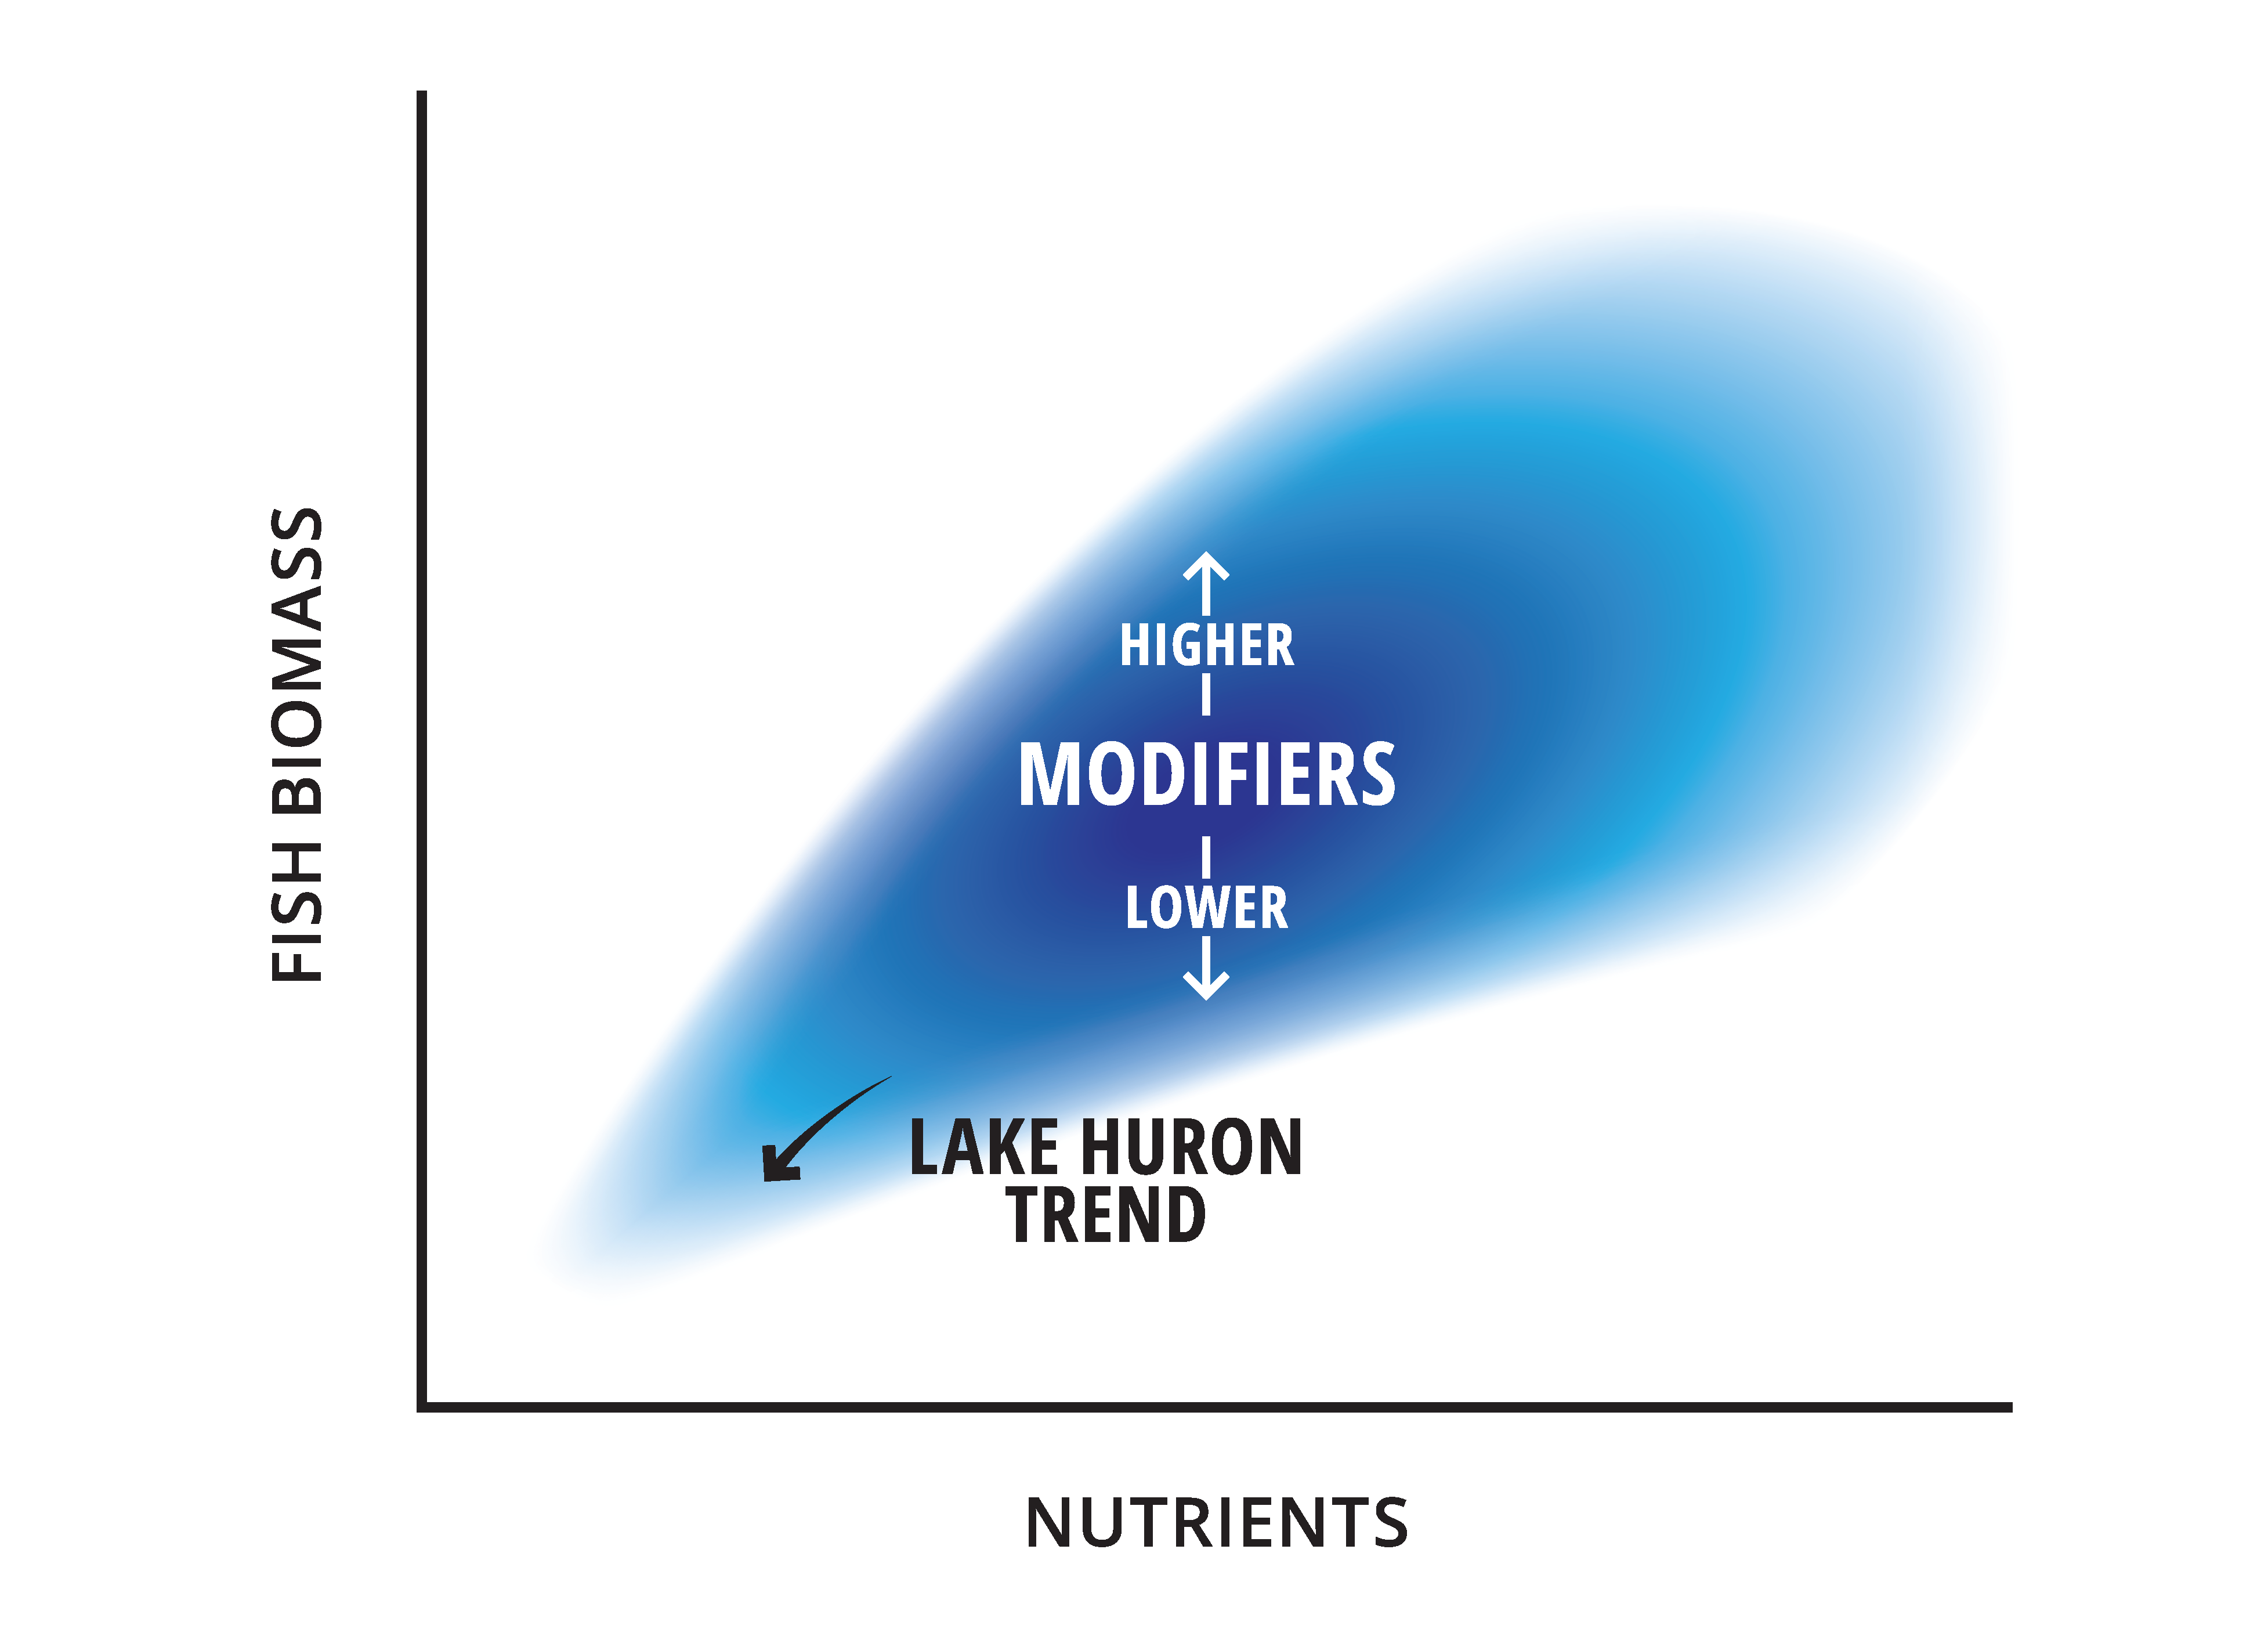 Blob graph sh owing Fish Biomass vs Nutrients, Lake Huron trend is in the lower left.